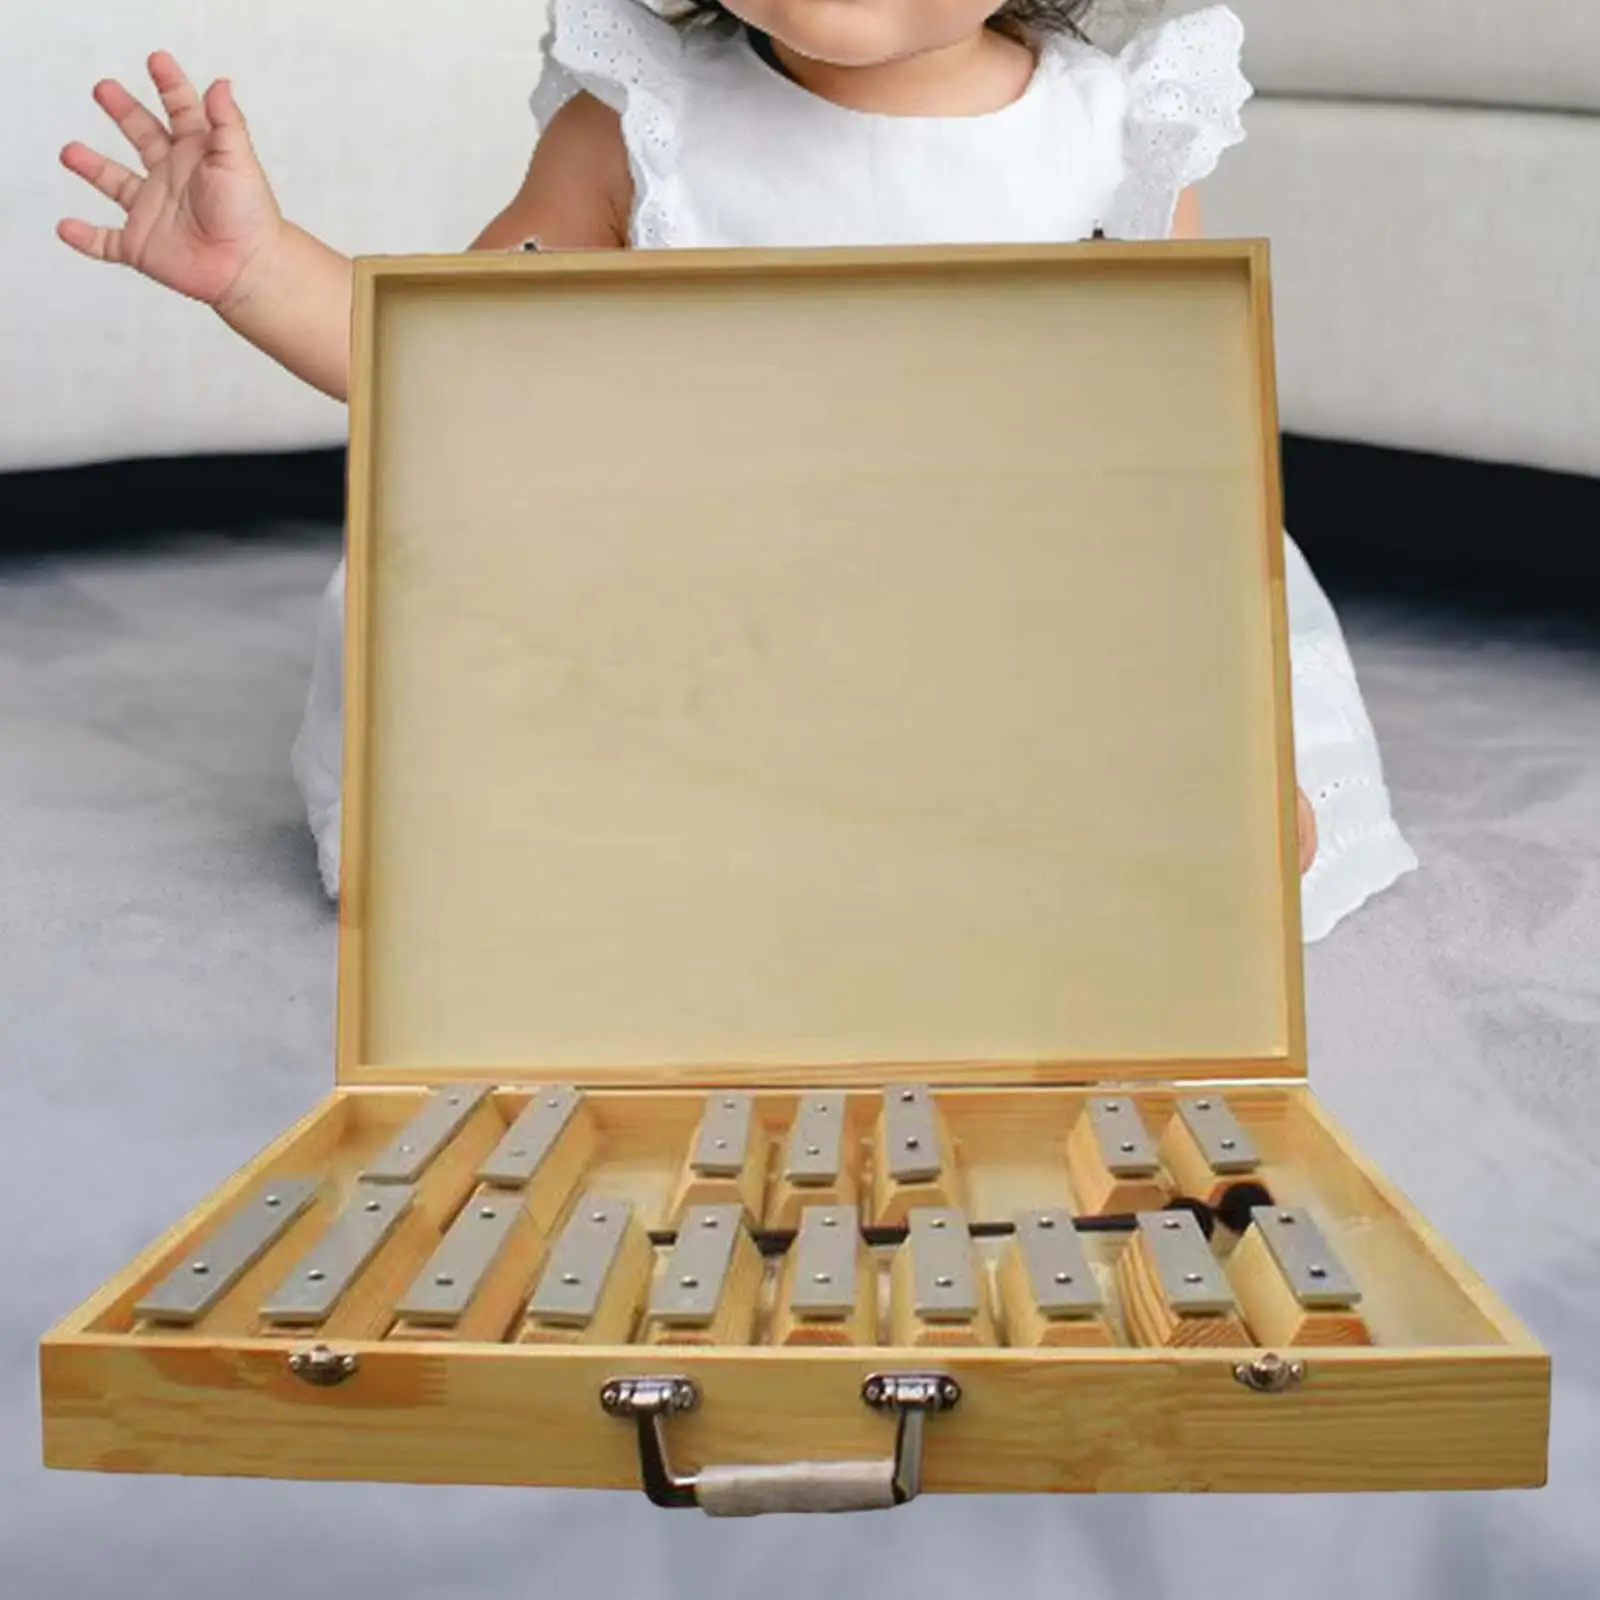 17 Tone Xylophone Glockenspiel Xylophone for Kids for Beginners, Music Teaching